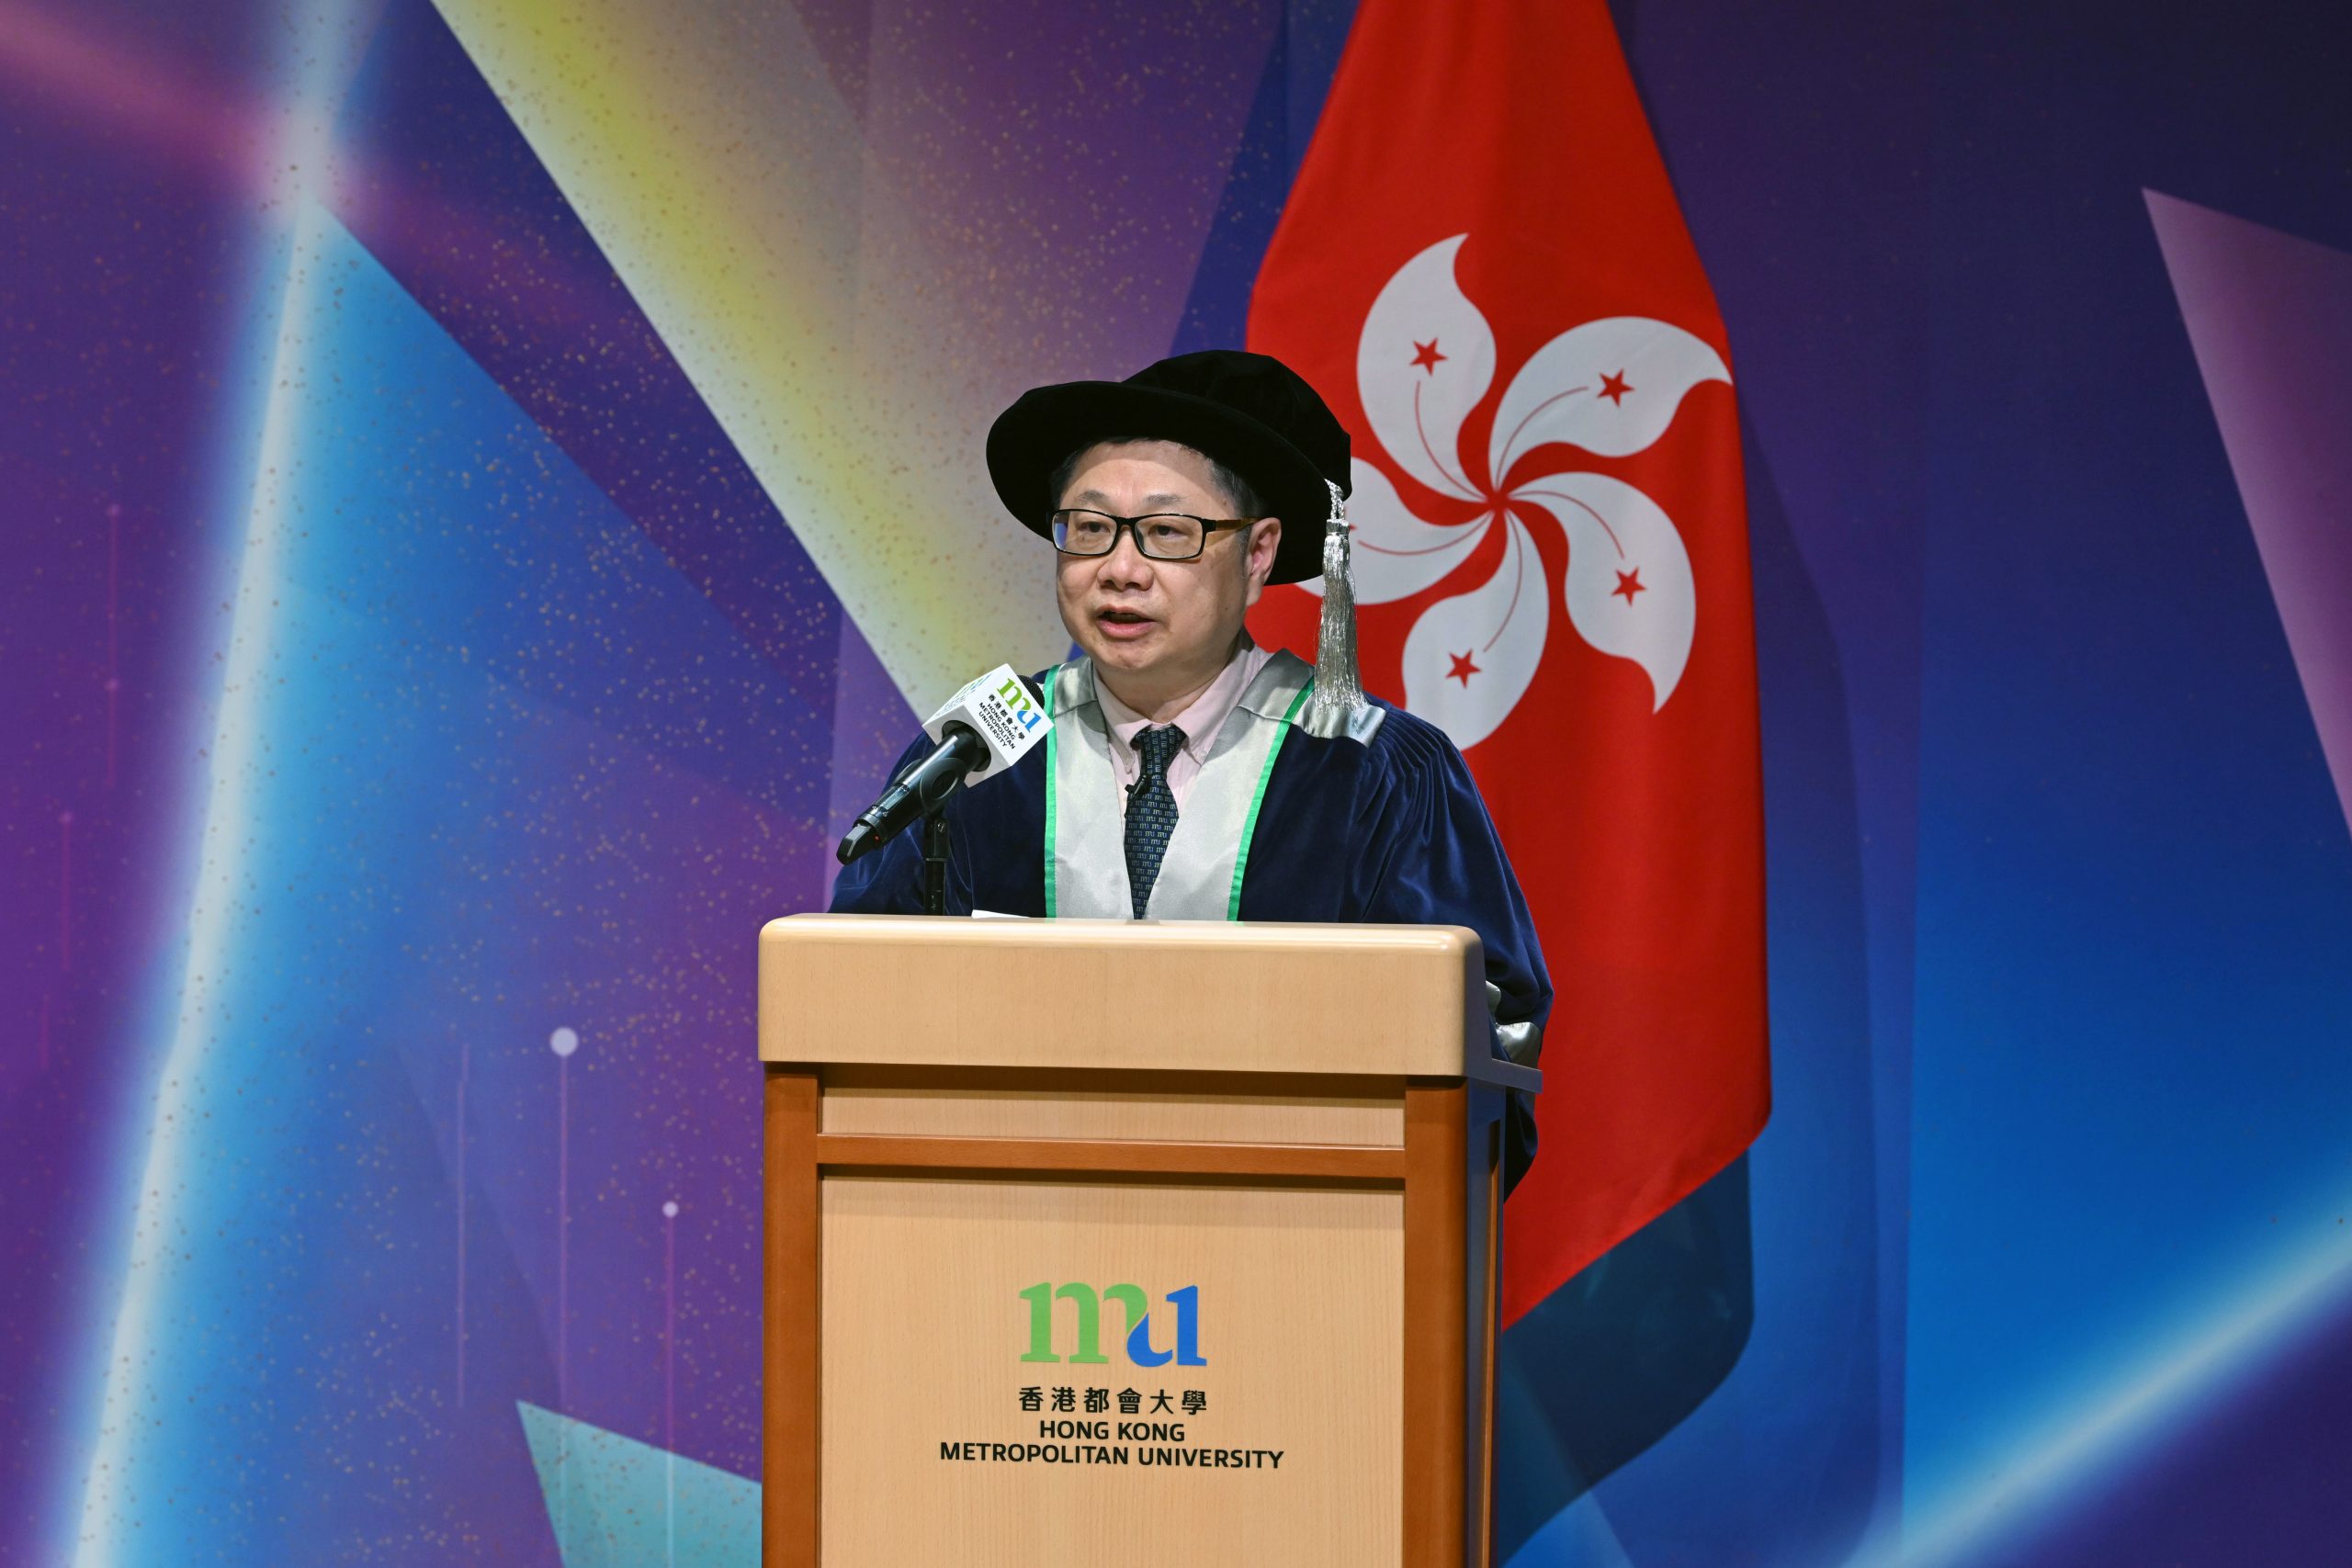 Addressing the ceremony, HKMU Acting President Prof. Reggie Kwan Ching-ping commends the five Honorary Doctorate recipients for their enormous contributions to higher education, to their respective professions, and to the community at large.